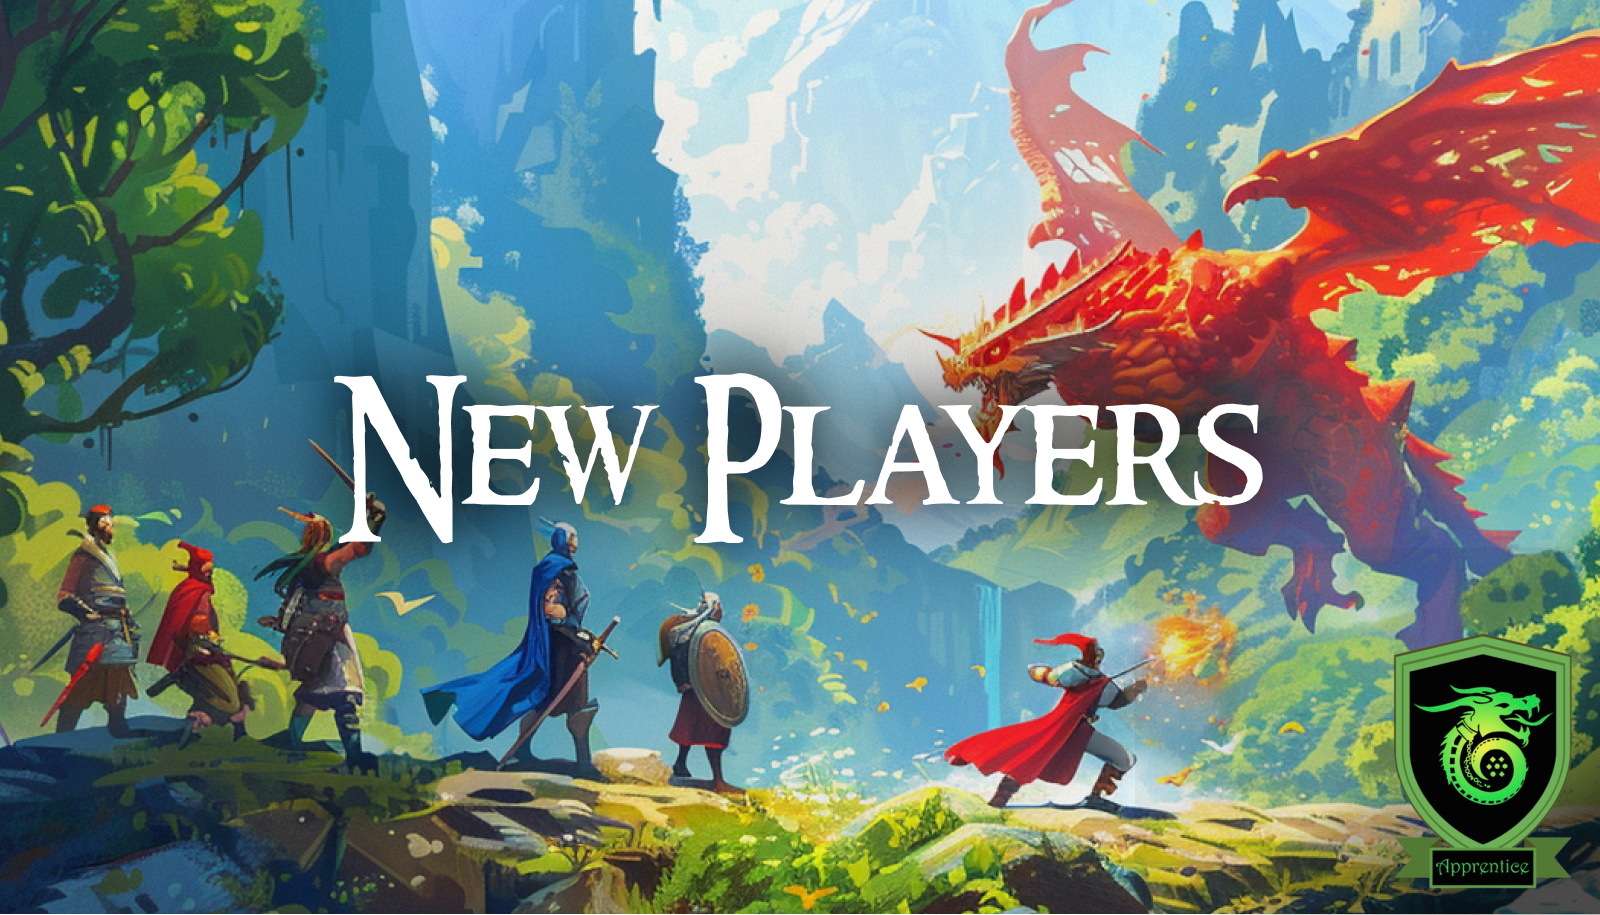 Dungeons & Dragons: New Players